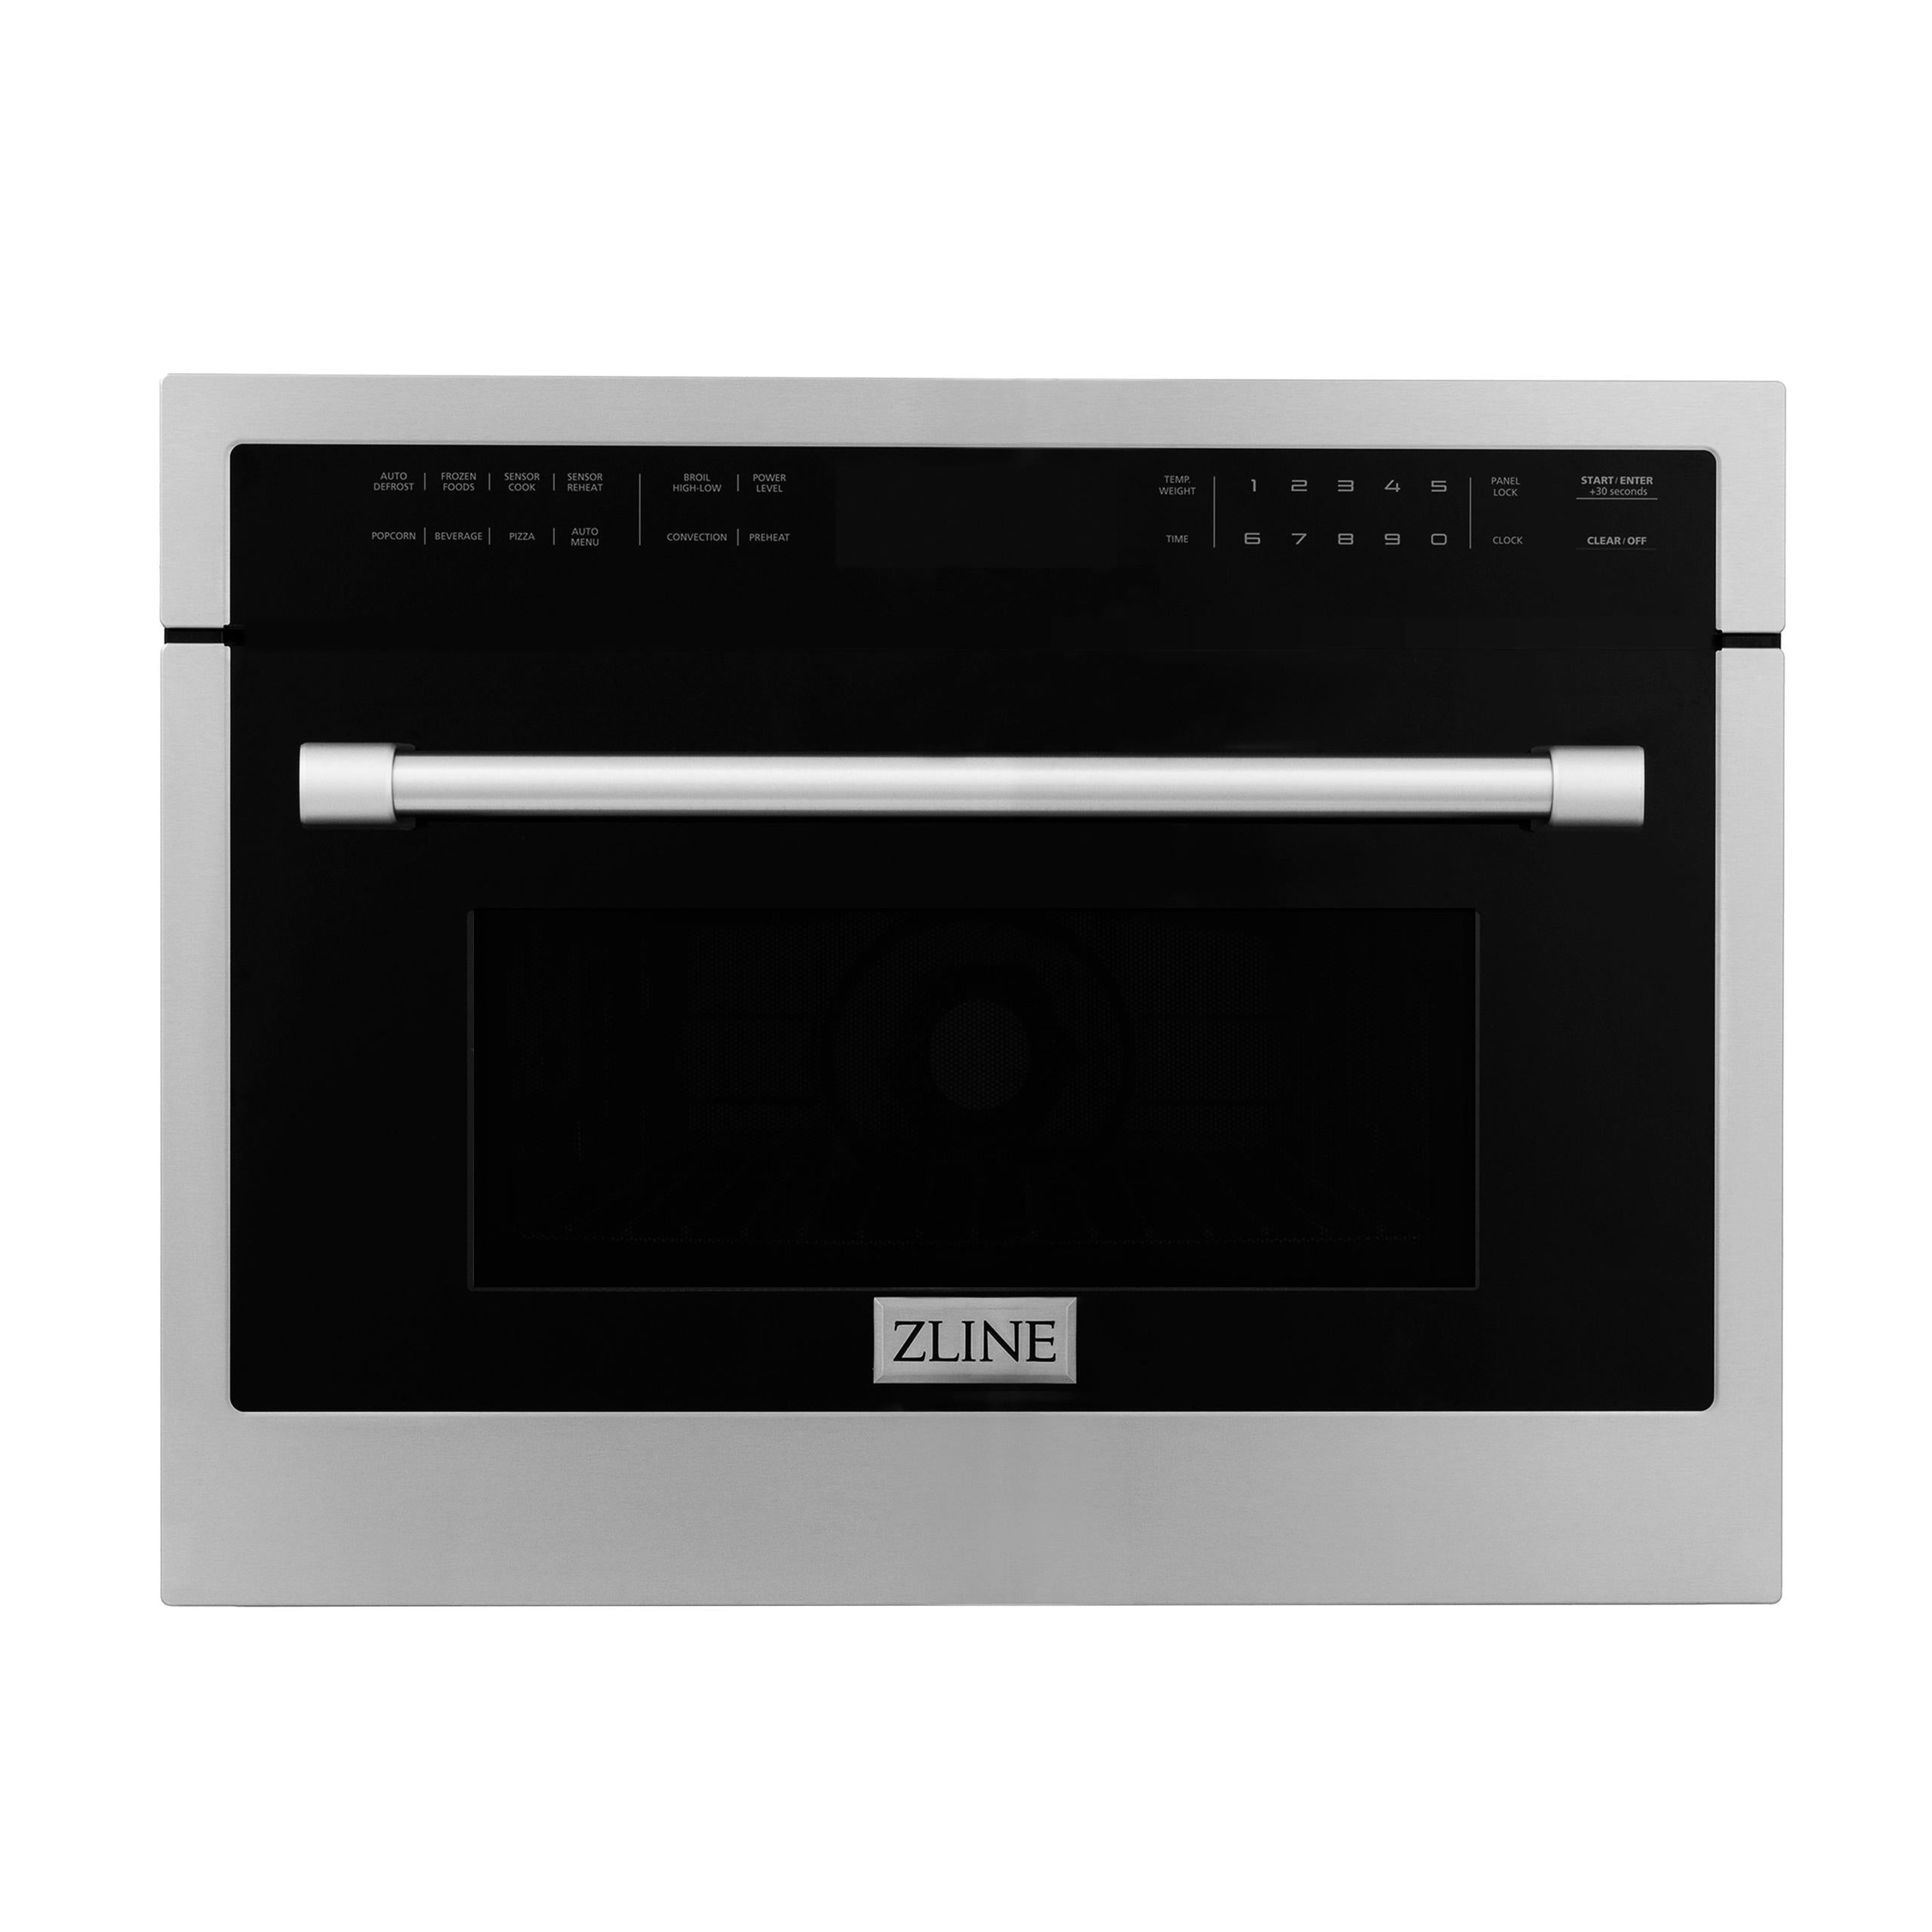 ZLINE KITCHEN AND BATH 2KPMW24AWS30 ZLINE Stainless Steel 24" Built-in Convection Microwave Oven and 30" Single Wall Oven with Self Clean